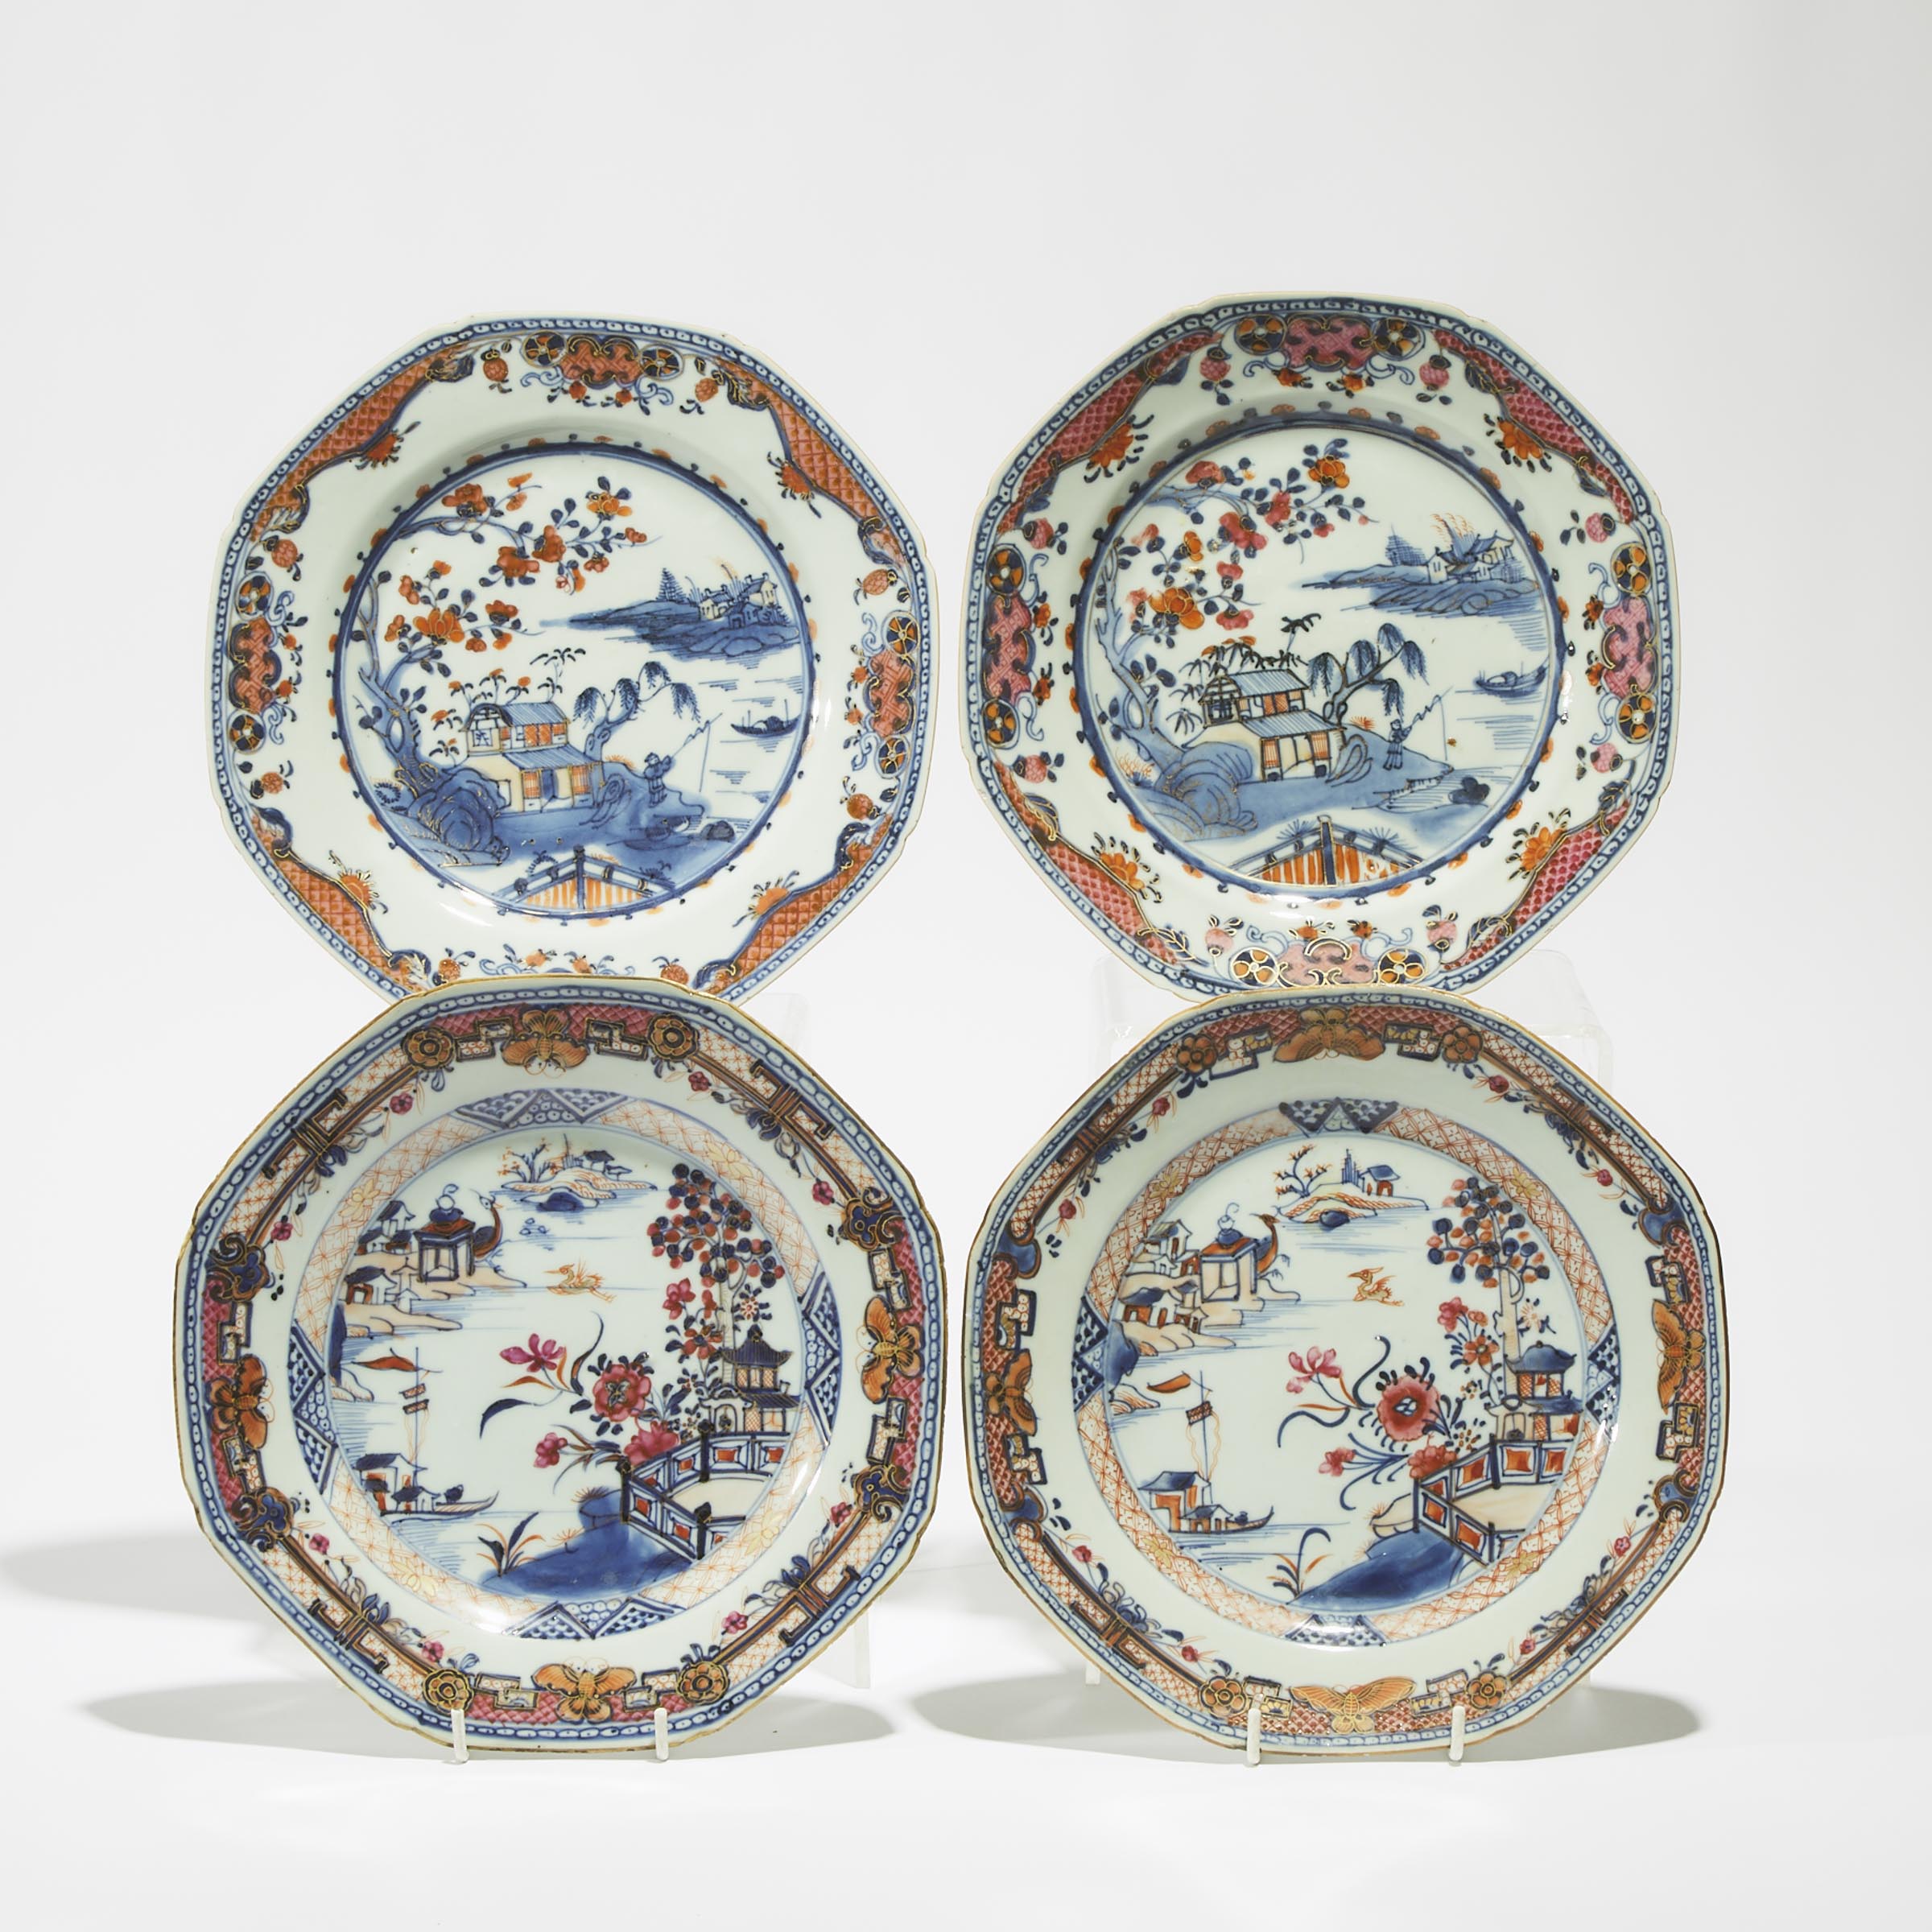 Two Pairs of Chinese Imari Octagonal 'Landscape' Dishes, 18th Century